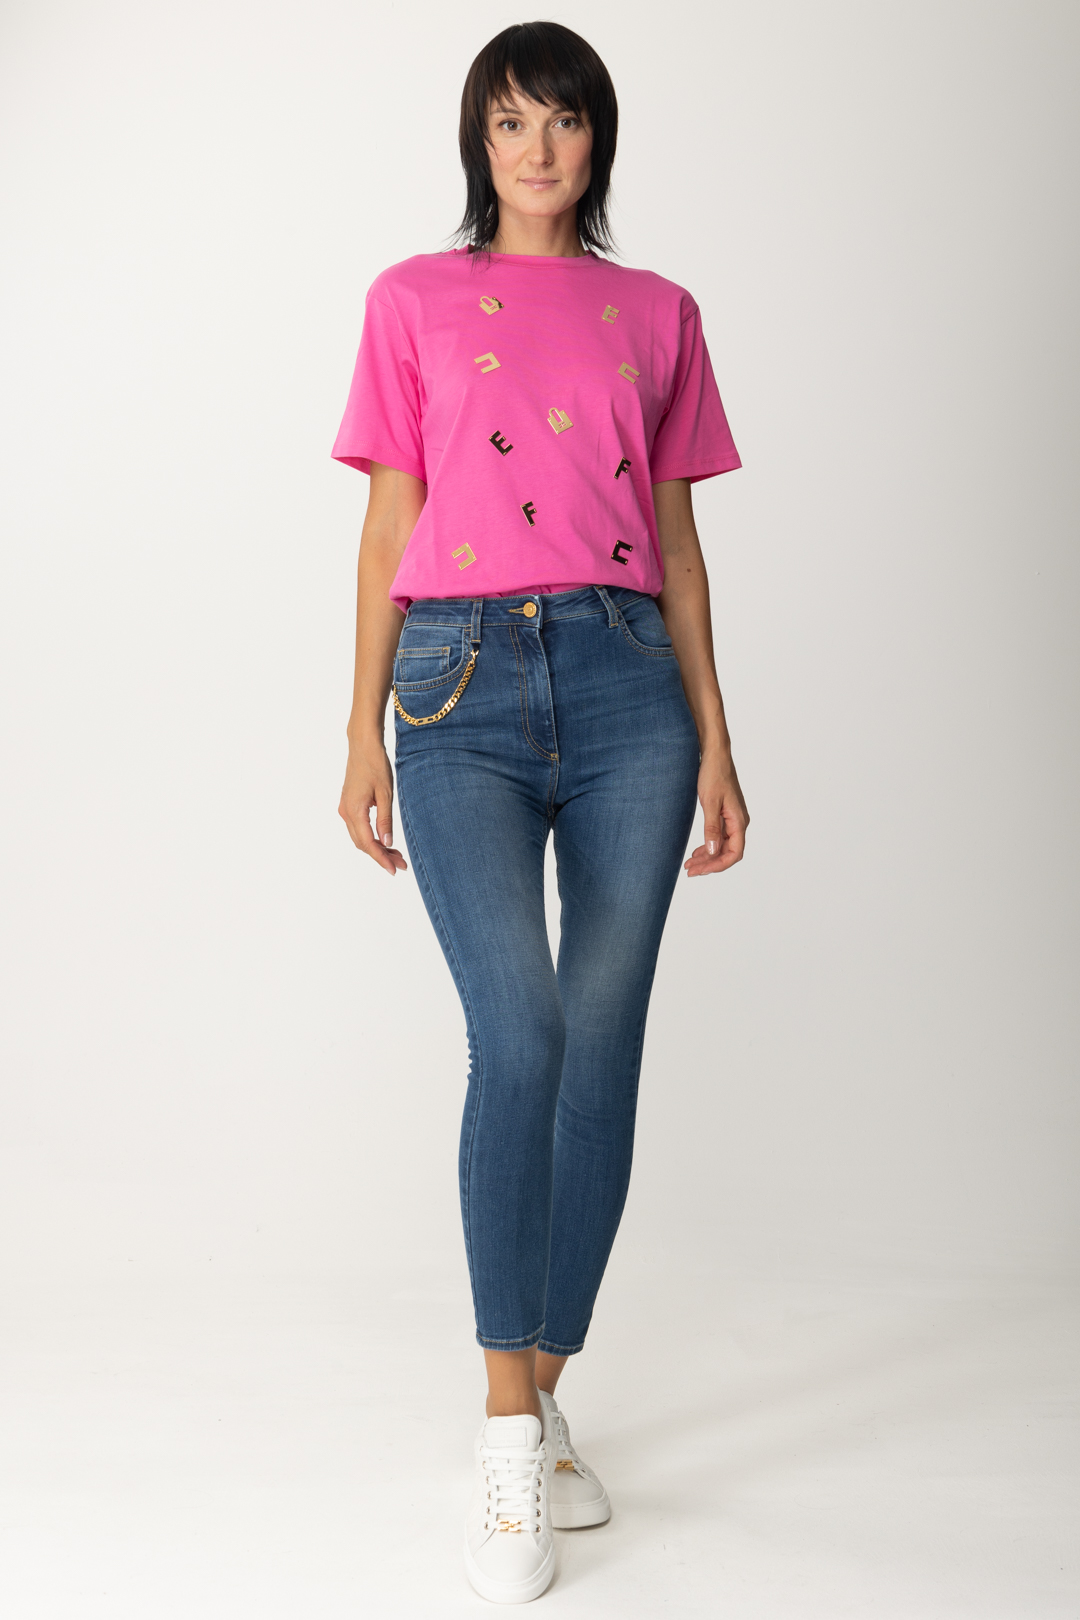 Preview: Elisabetta Franchi T-shirt with lettering plates PINK FLUO